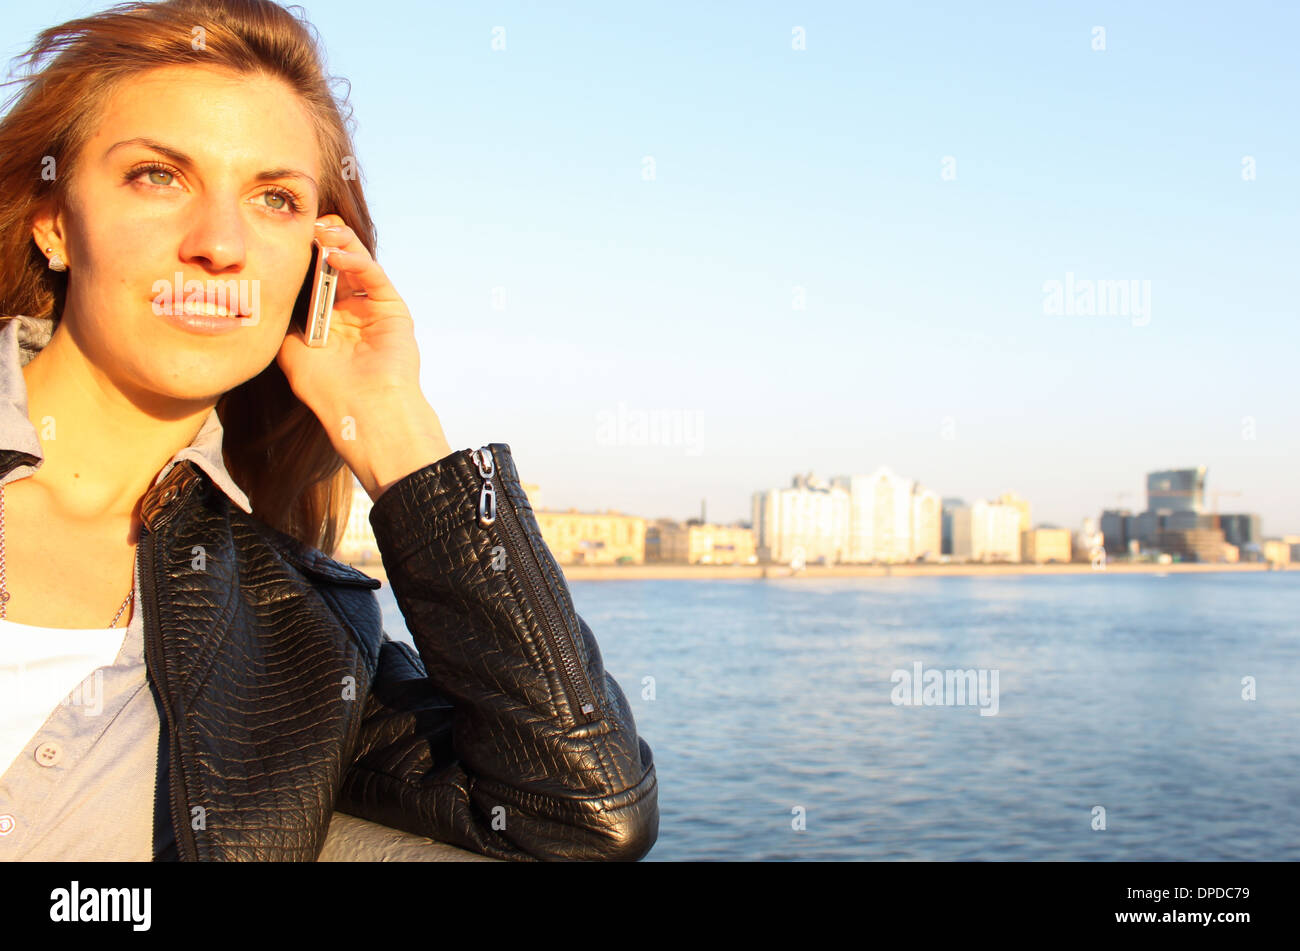 woman face 'by phone' 's[peaking by phone' portrait sunlight evening city water river urban Stock Photo